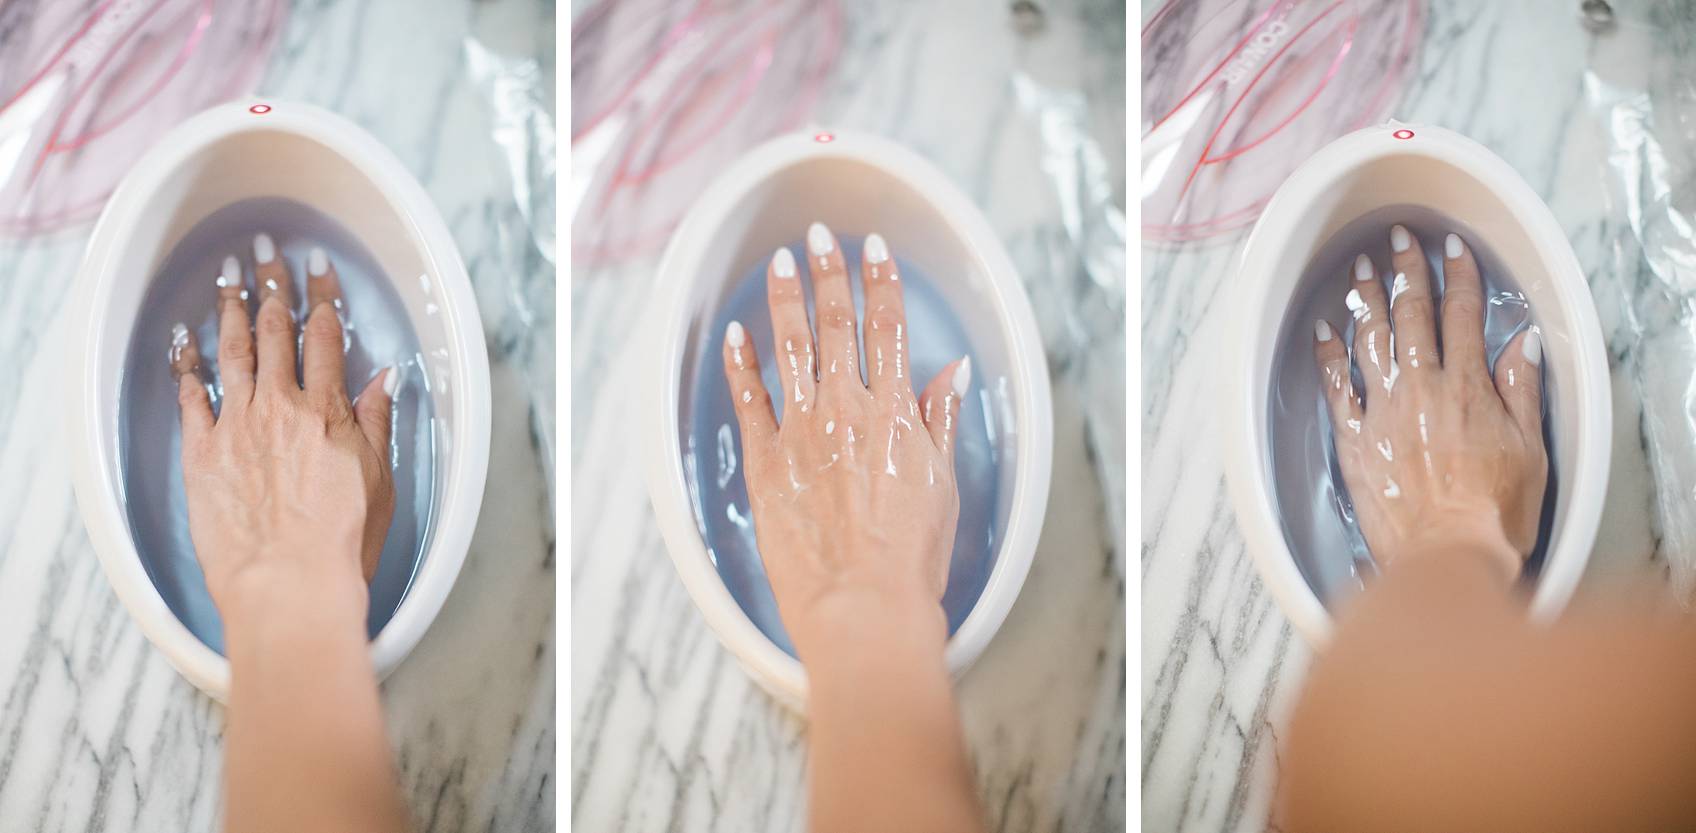 conair paraffin wax bath - a how to and before after photos